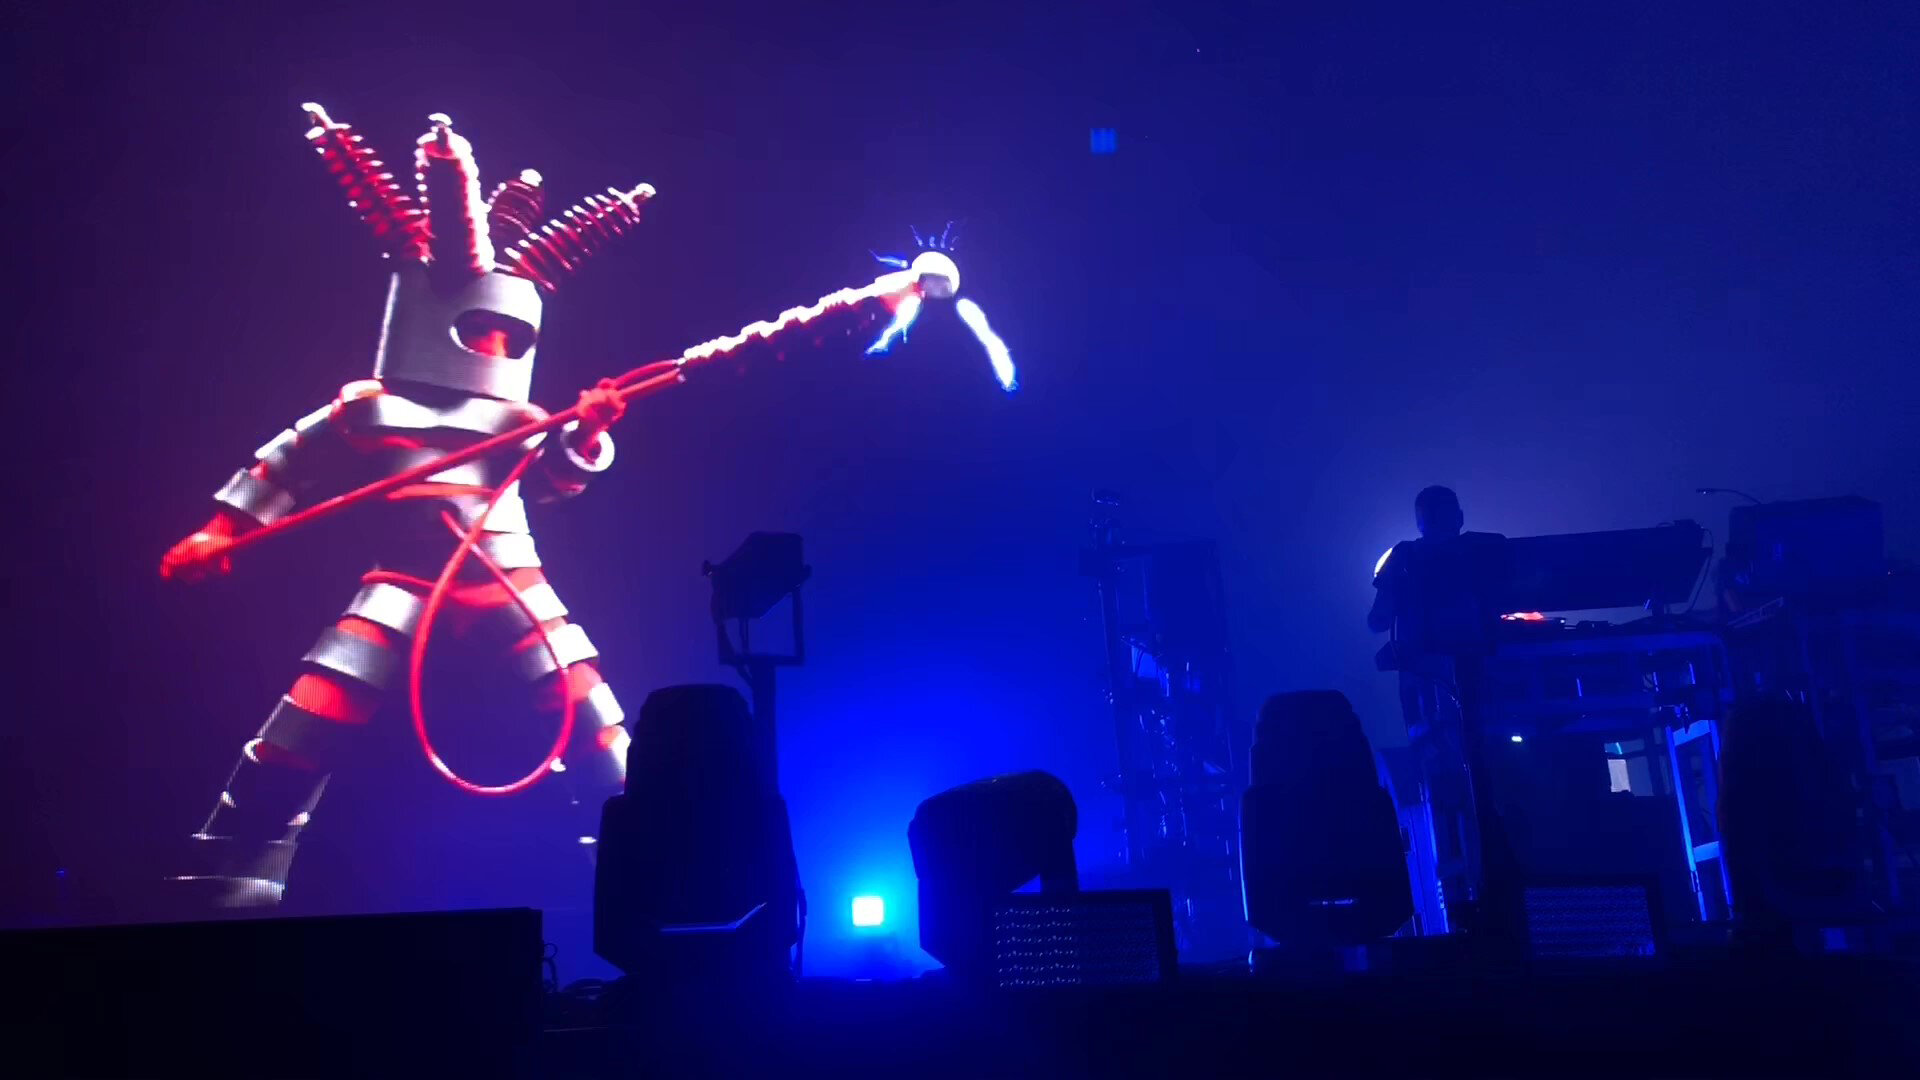 The_Chemical_Brothers_-_Eve_of_Destruction_at_the_Shrine_Expo_Hall_on_05.15.19.jpg